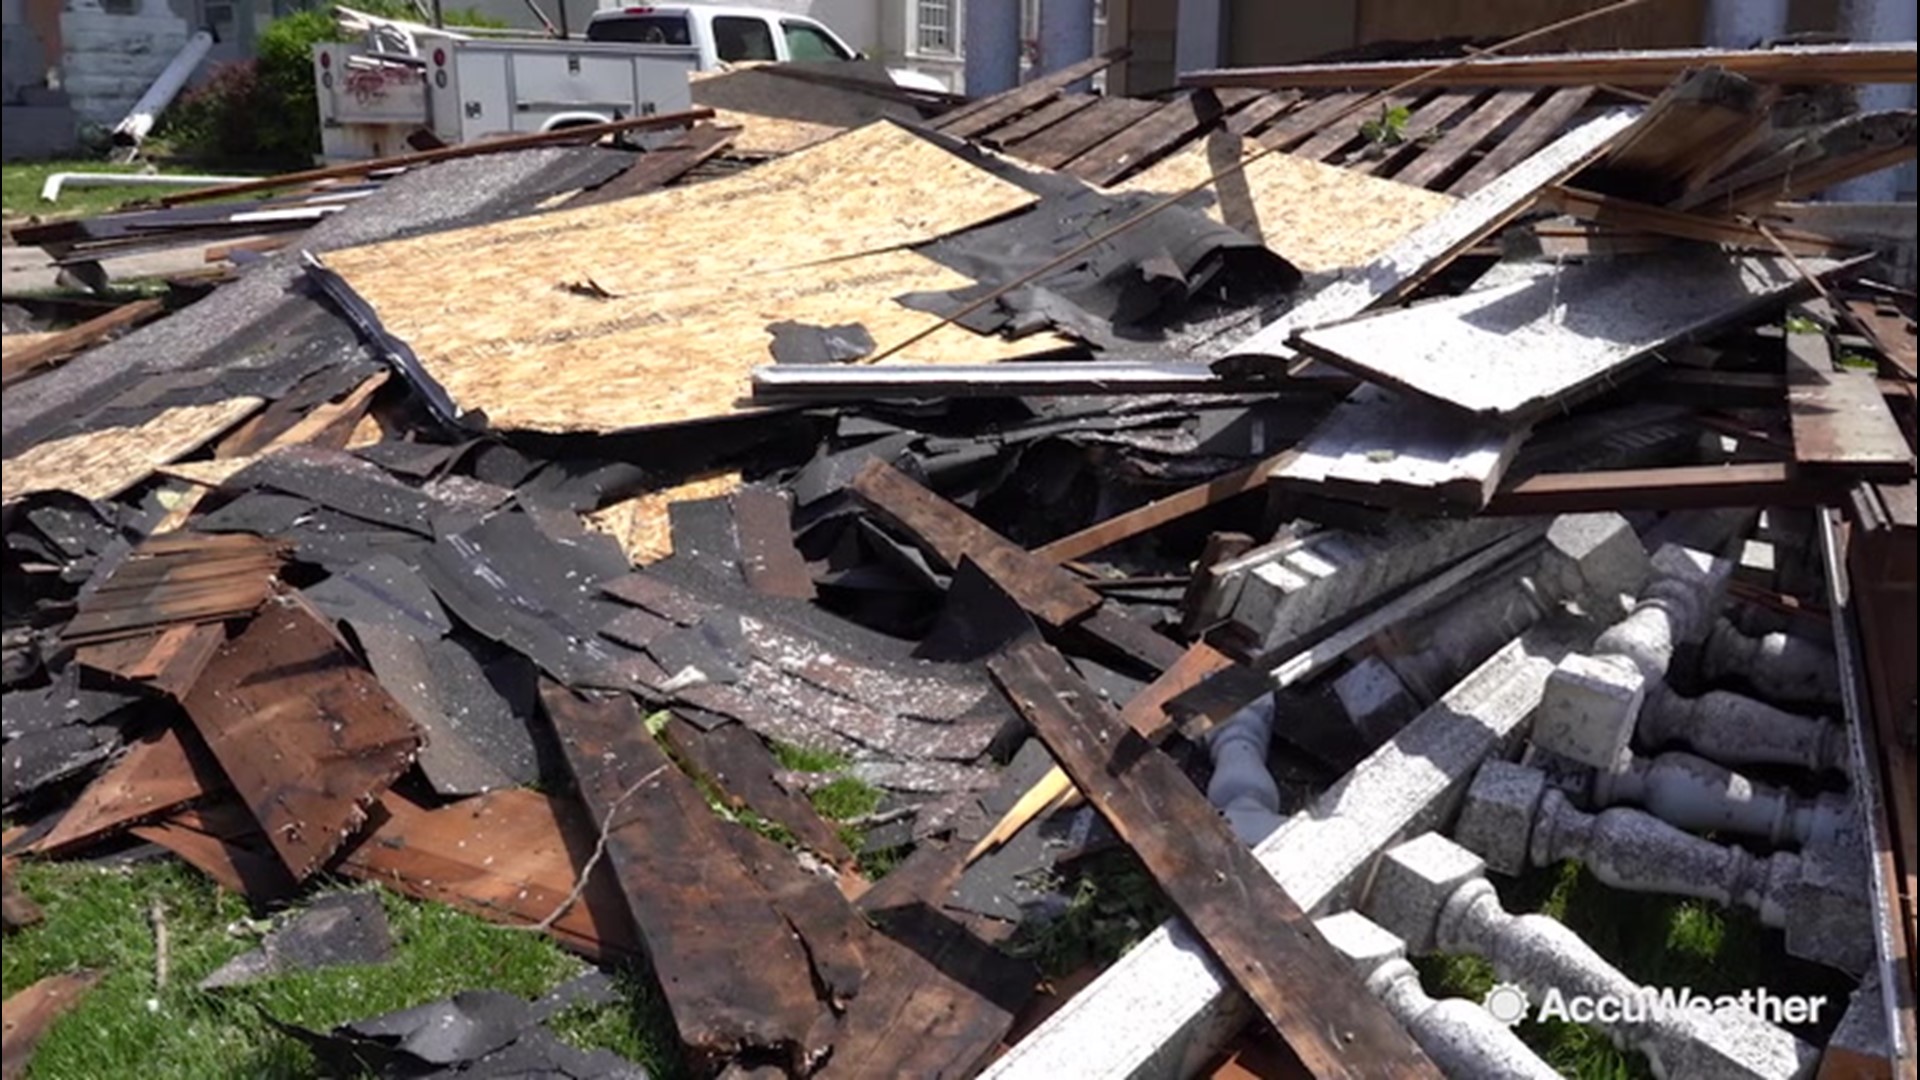 After Wednesday's EF3 tornado hit the town of Jefferson City Missouri, the clean up is underway as residents begin to repair. Our Jonathan Petramala takes a look at what the storm did to the historic buildings in town.